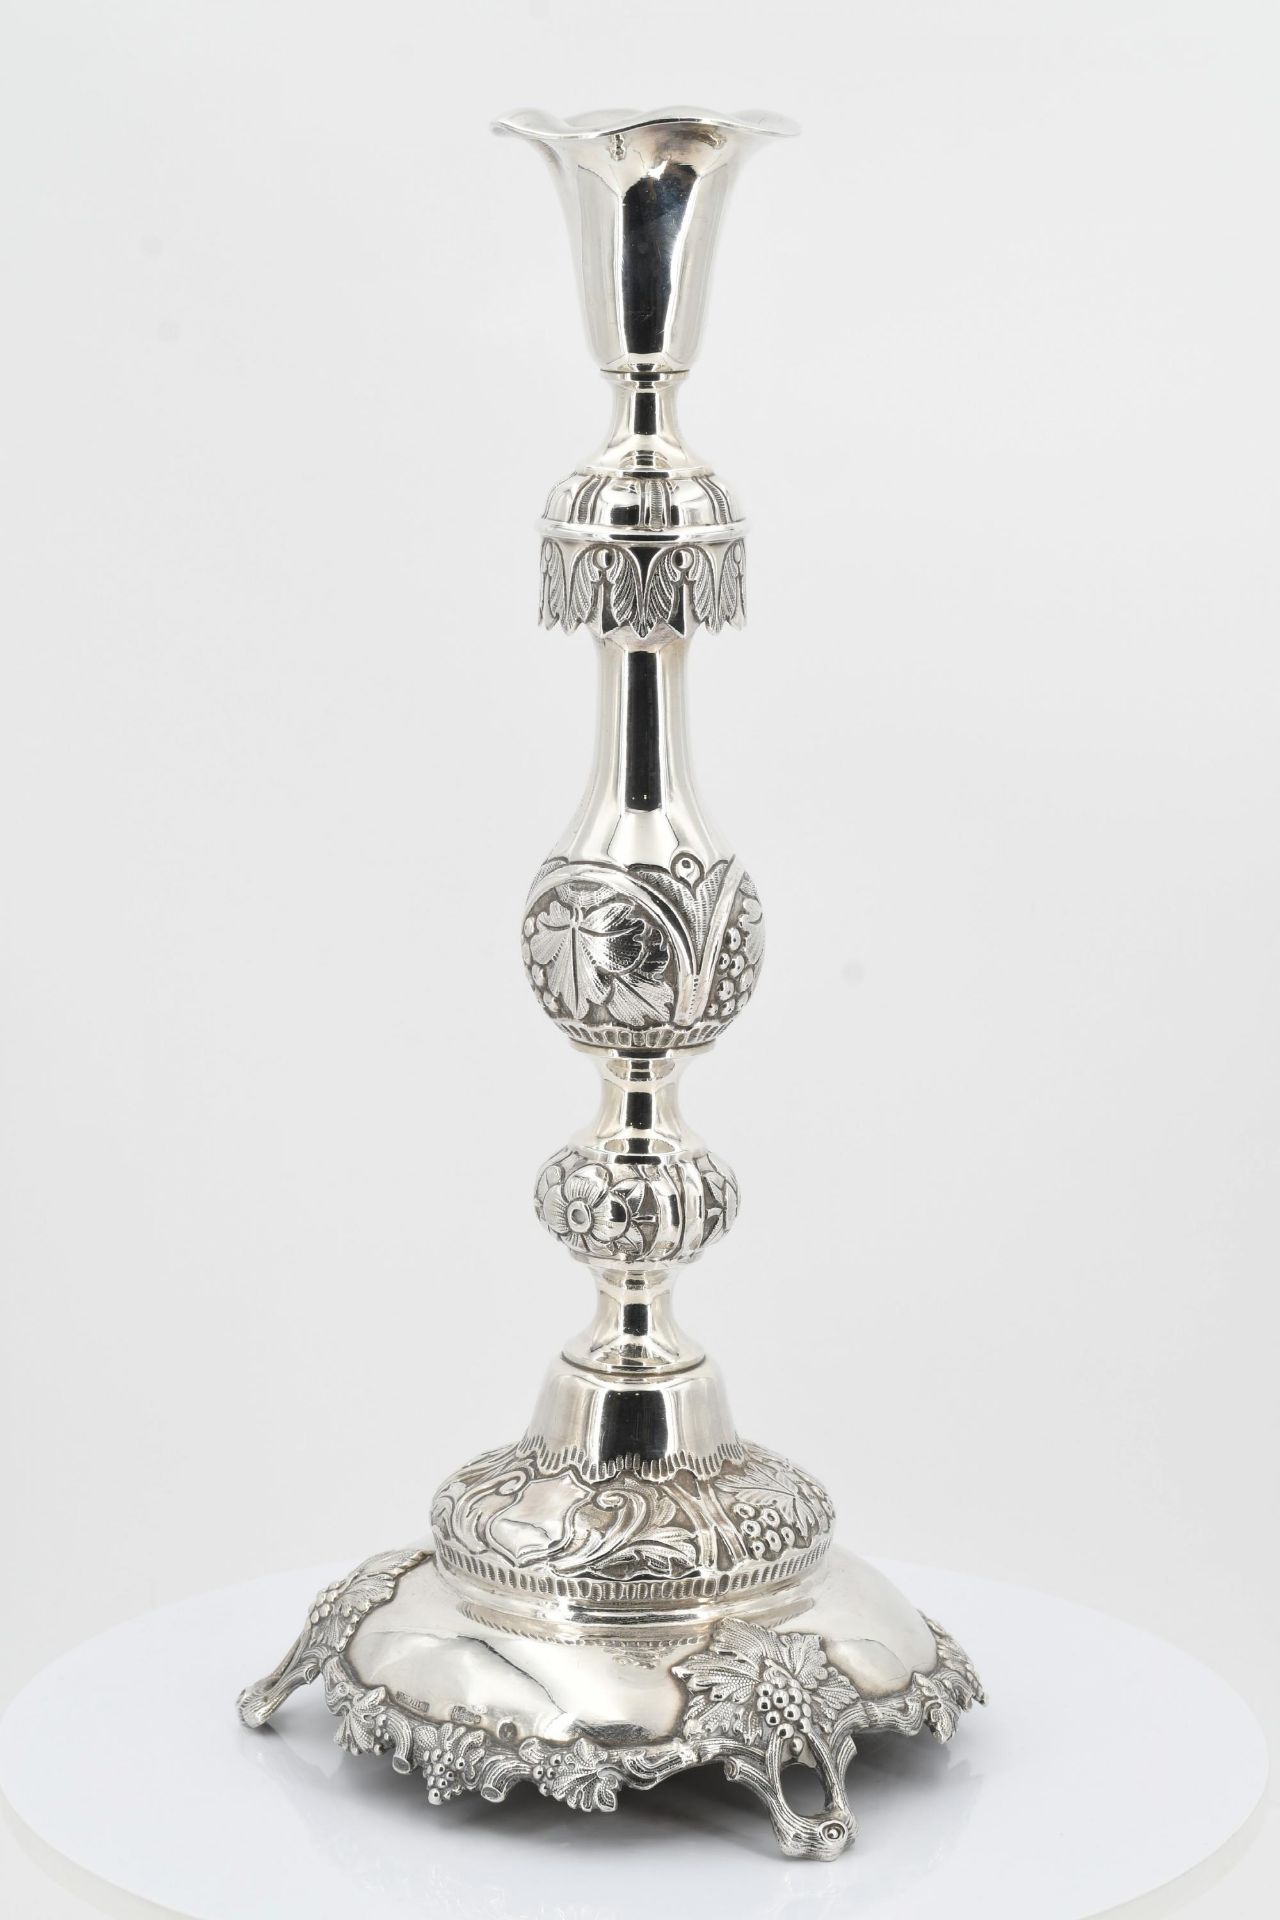 Pair of candlesticks with grape and vine décor - Image 11 of 11